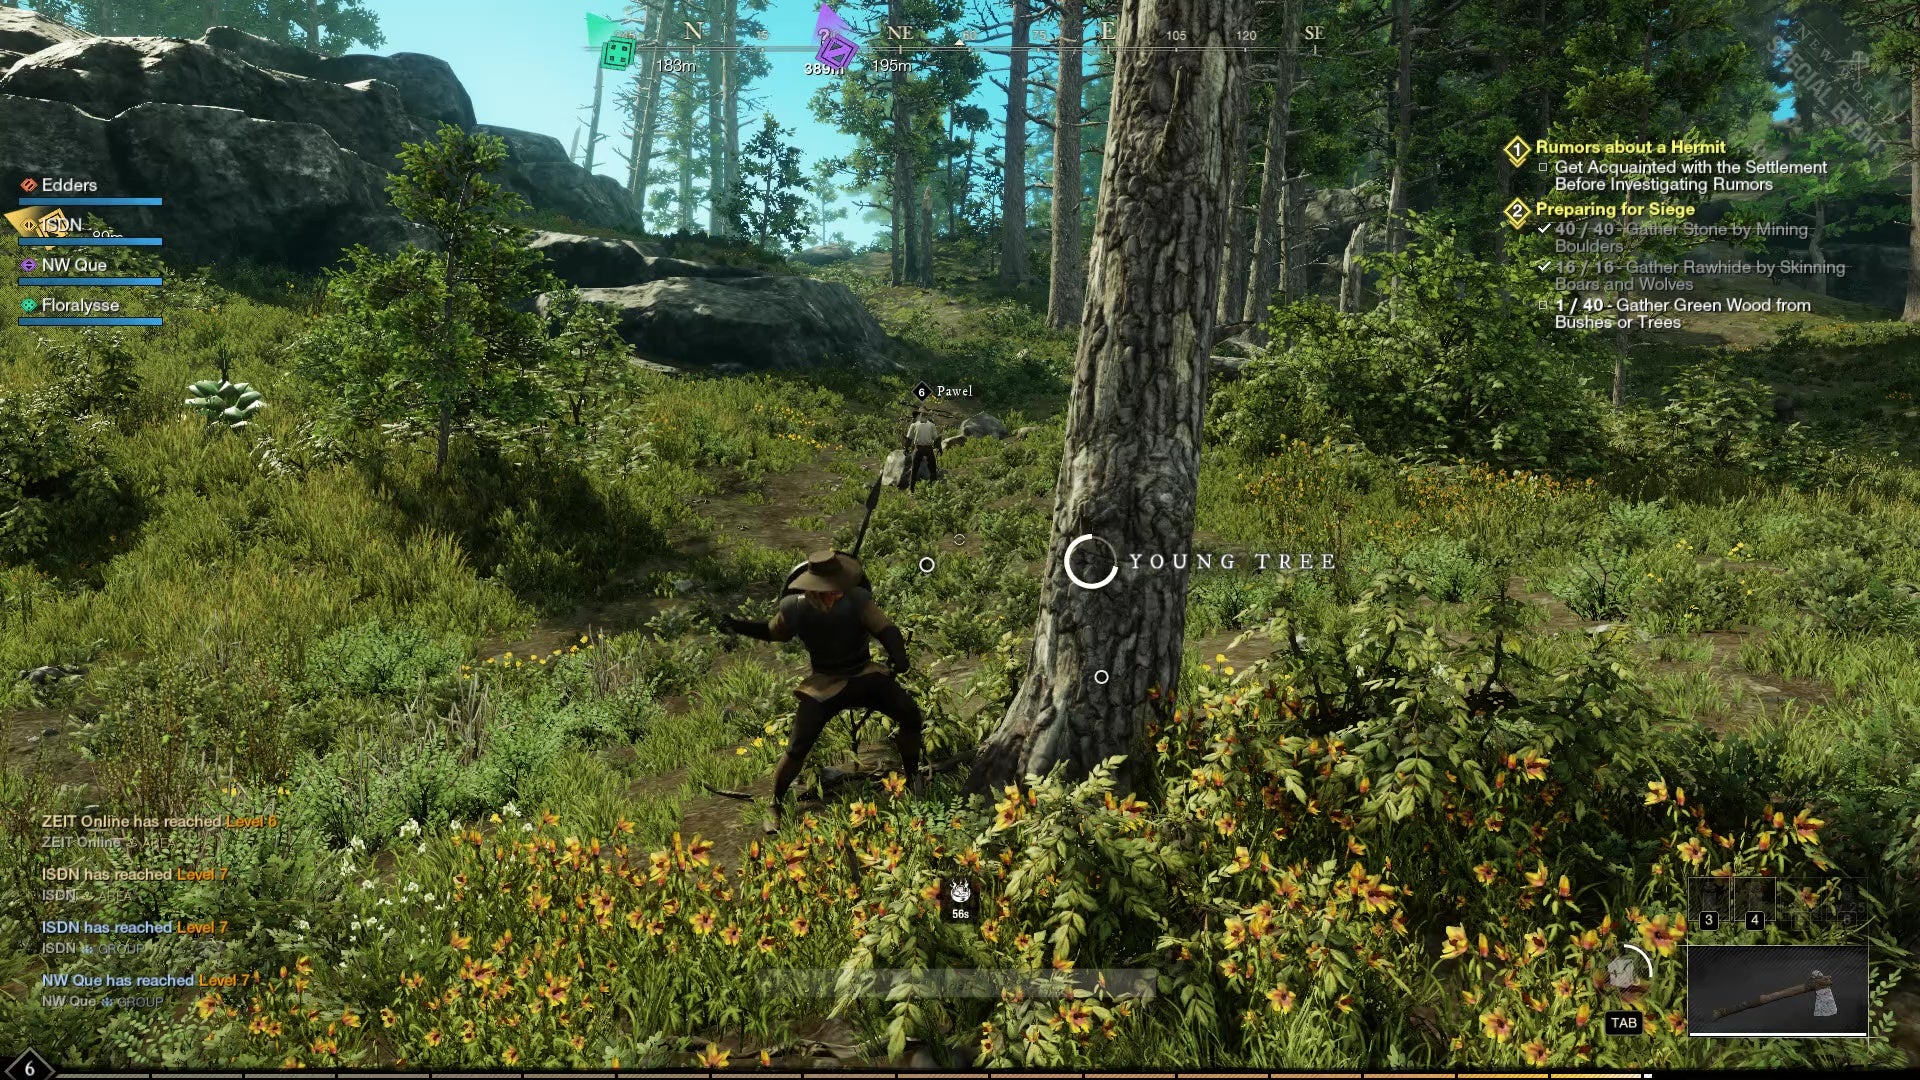 An image from New World which shows the player chopping down a young tree in a woodland area.